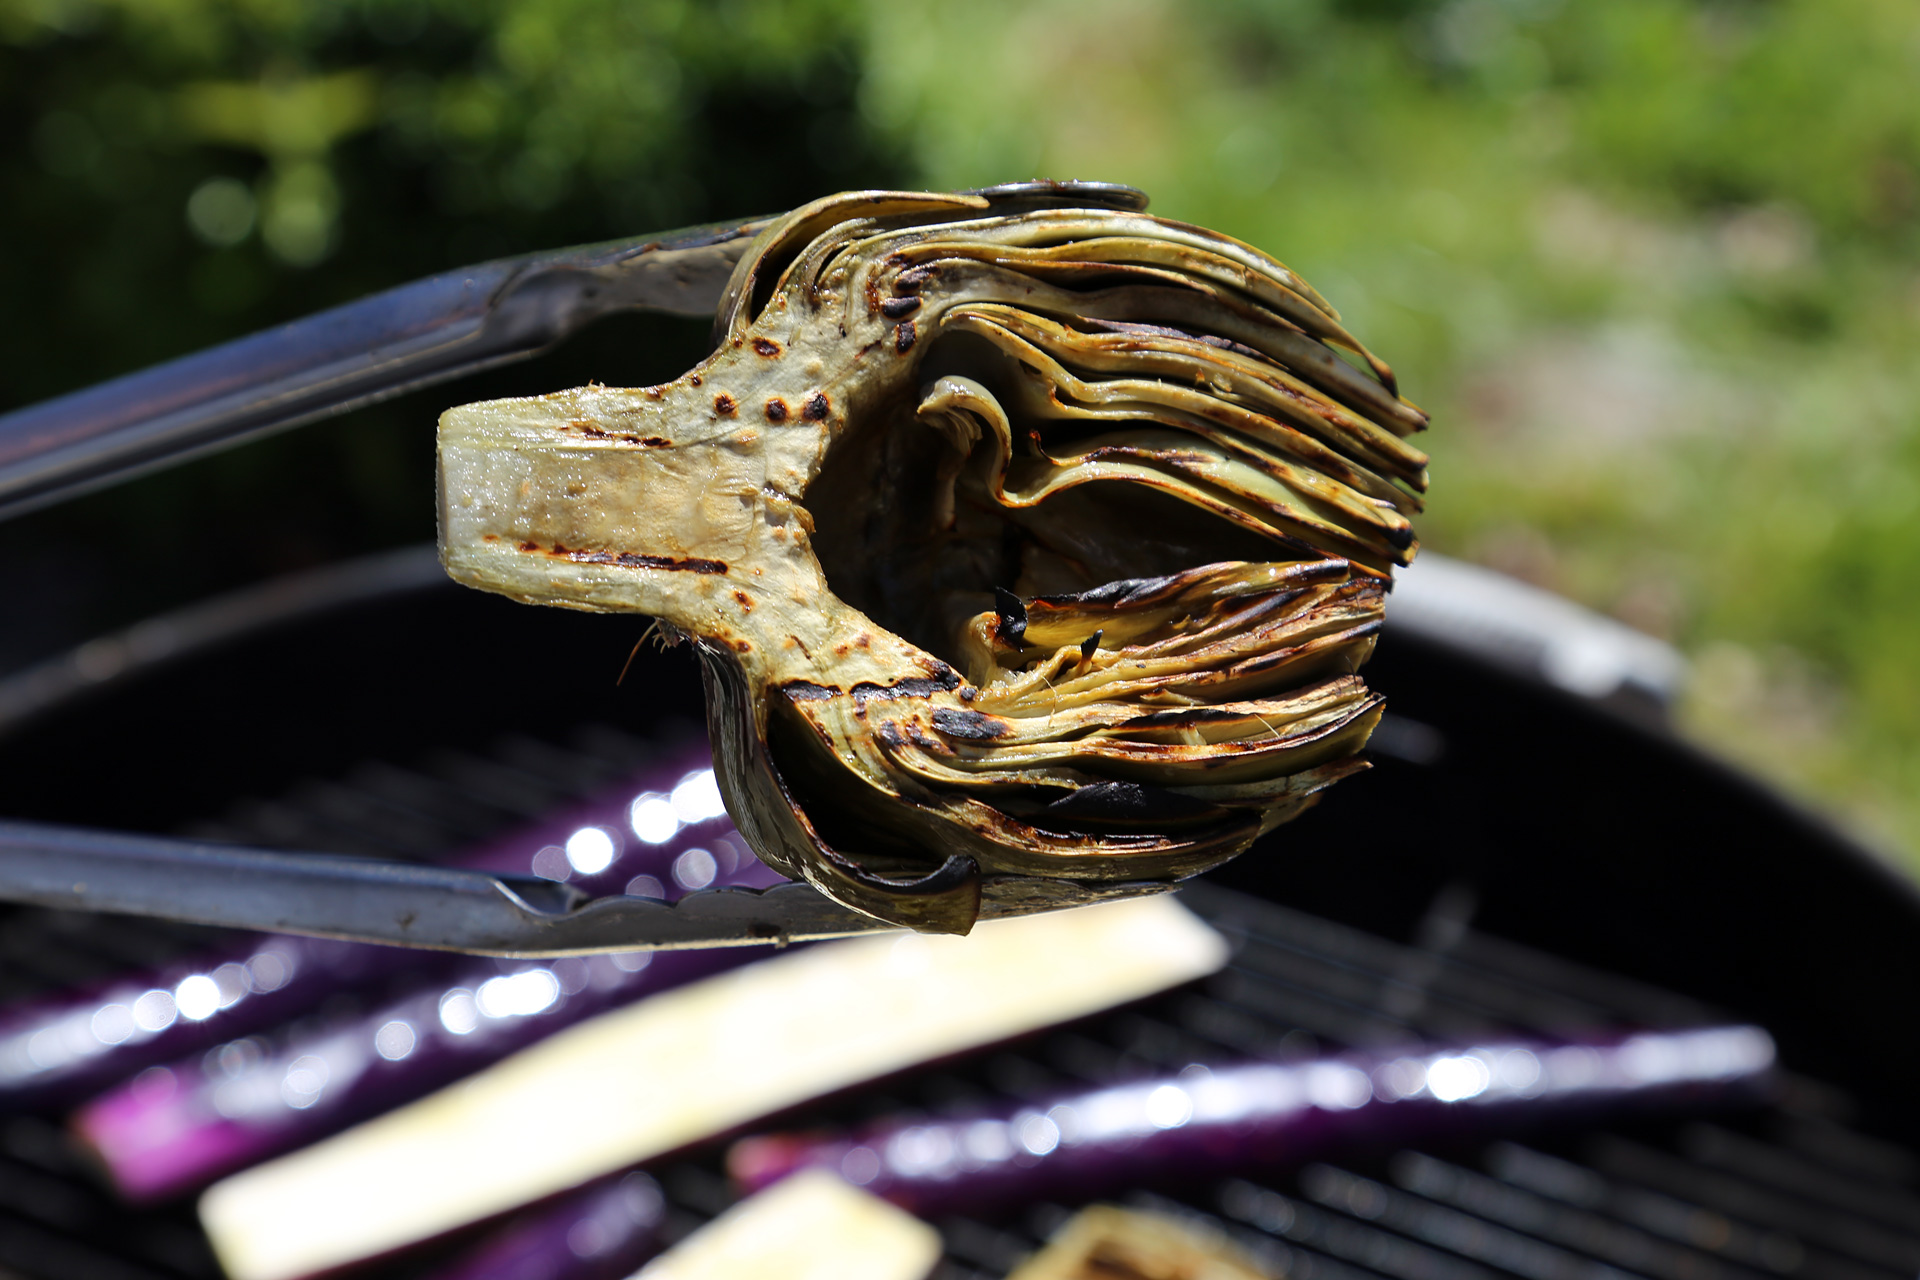 Cook until the artichokes are nicely grill-marked and tender.